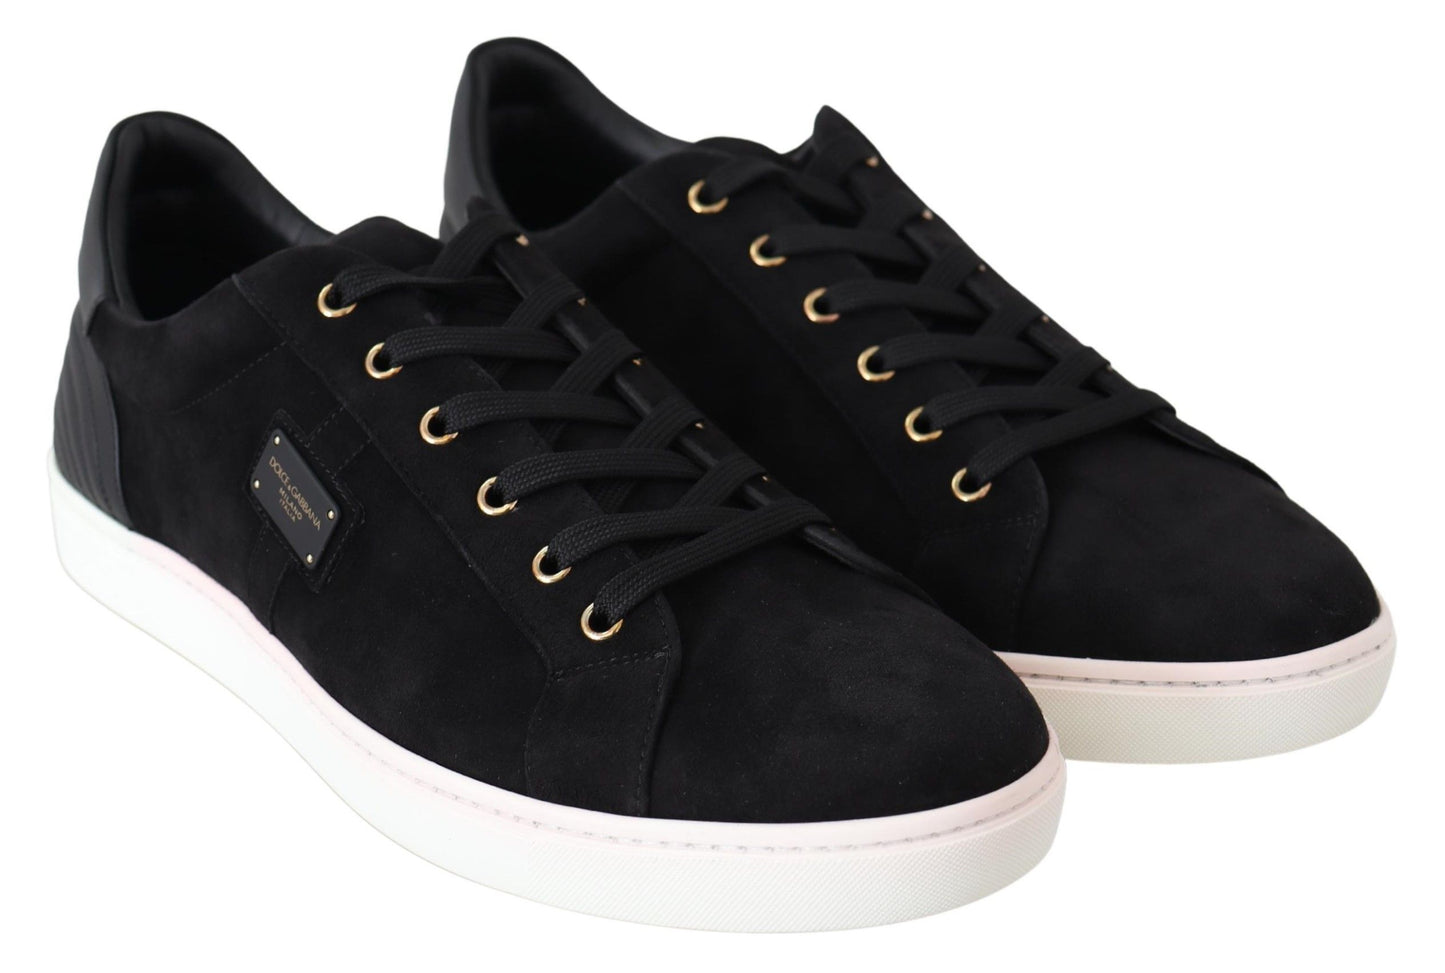 Chic Black Leather Sneakers for Men